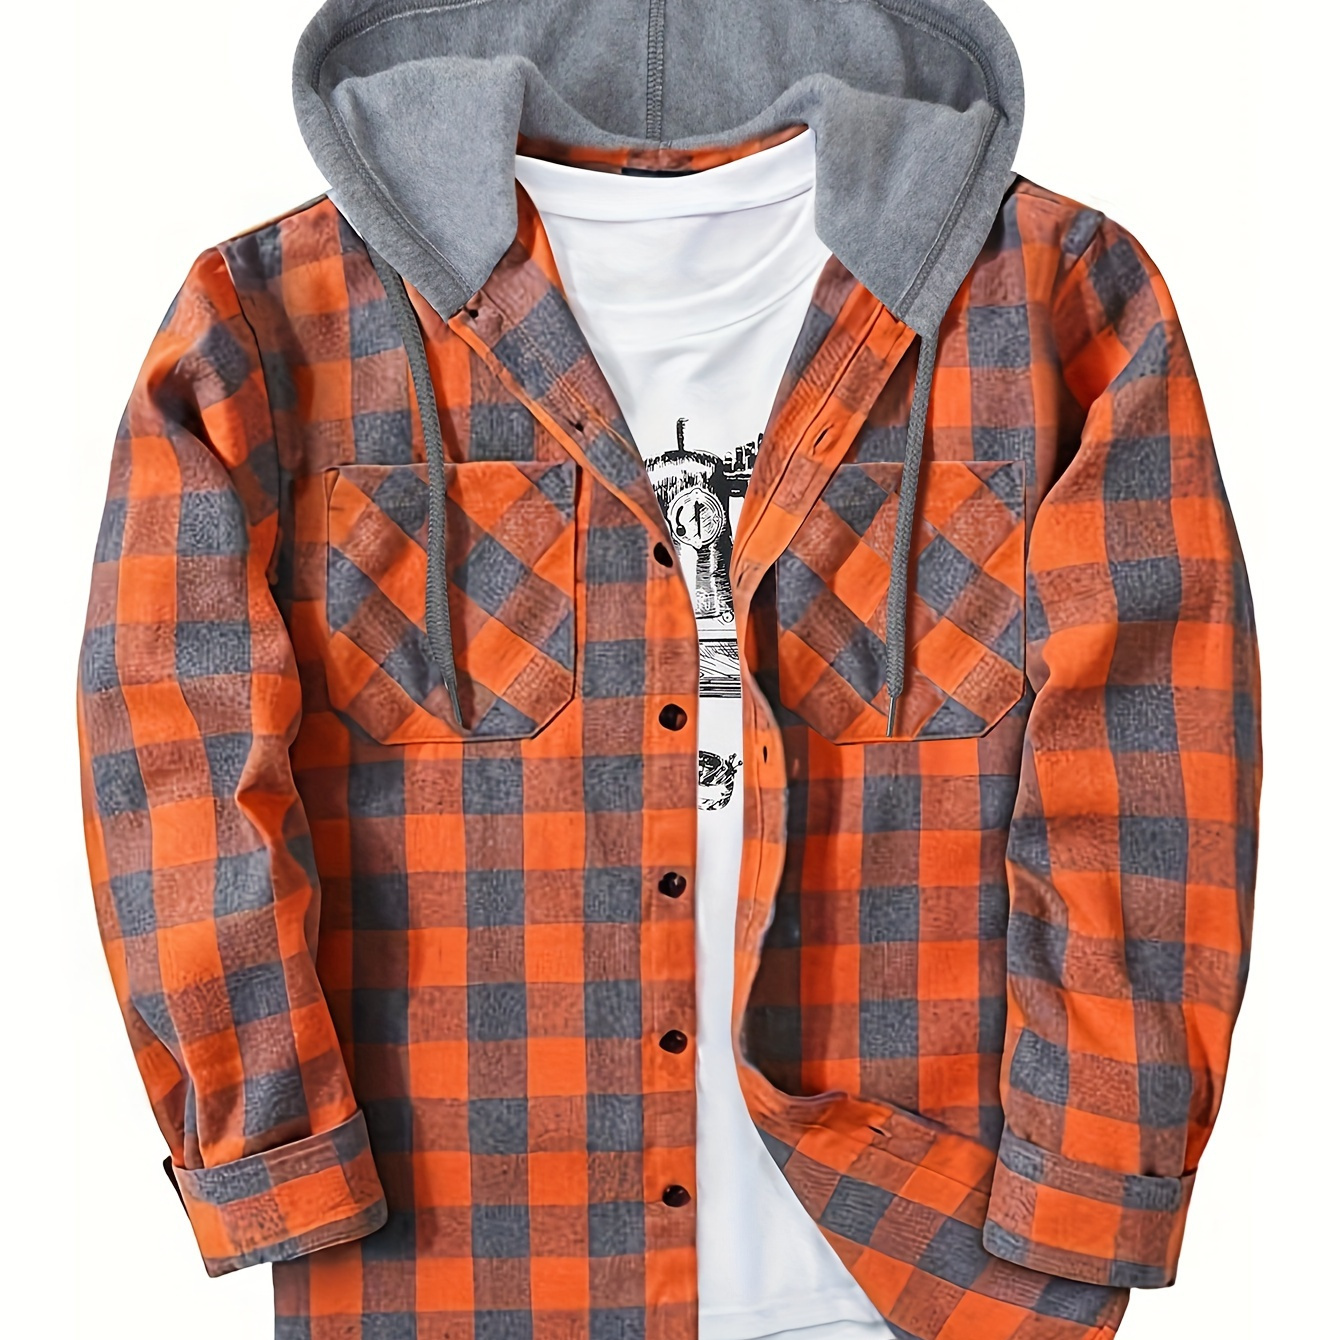 Plaid Shirt Coat For Men Long Sleeve Casual Regular Fit Button Up Hooded Shirts Jacket